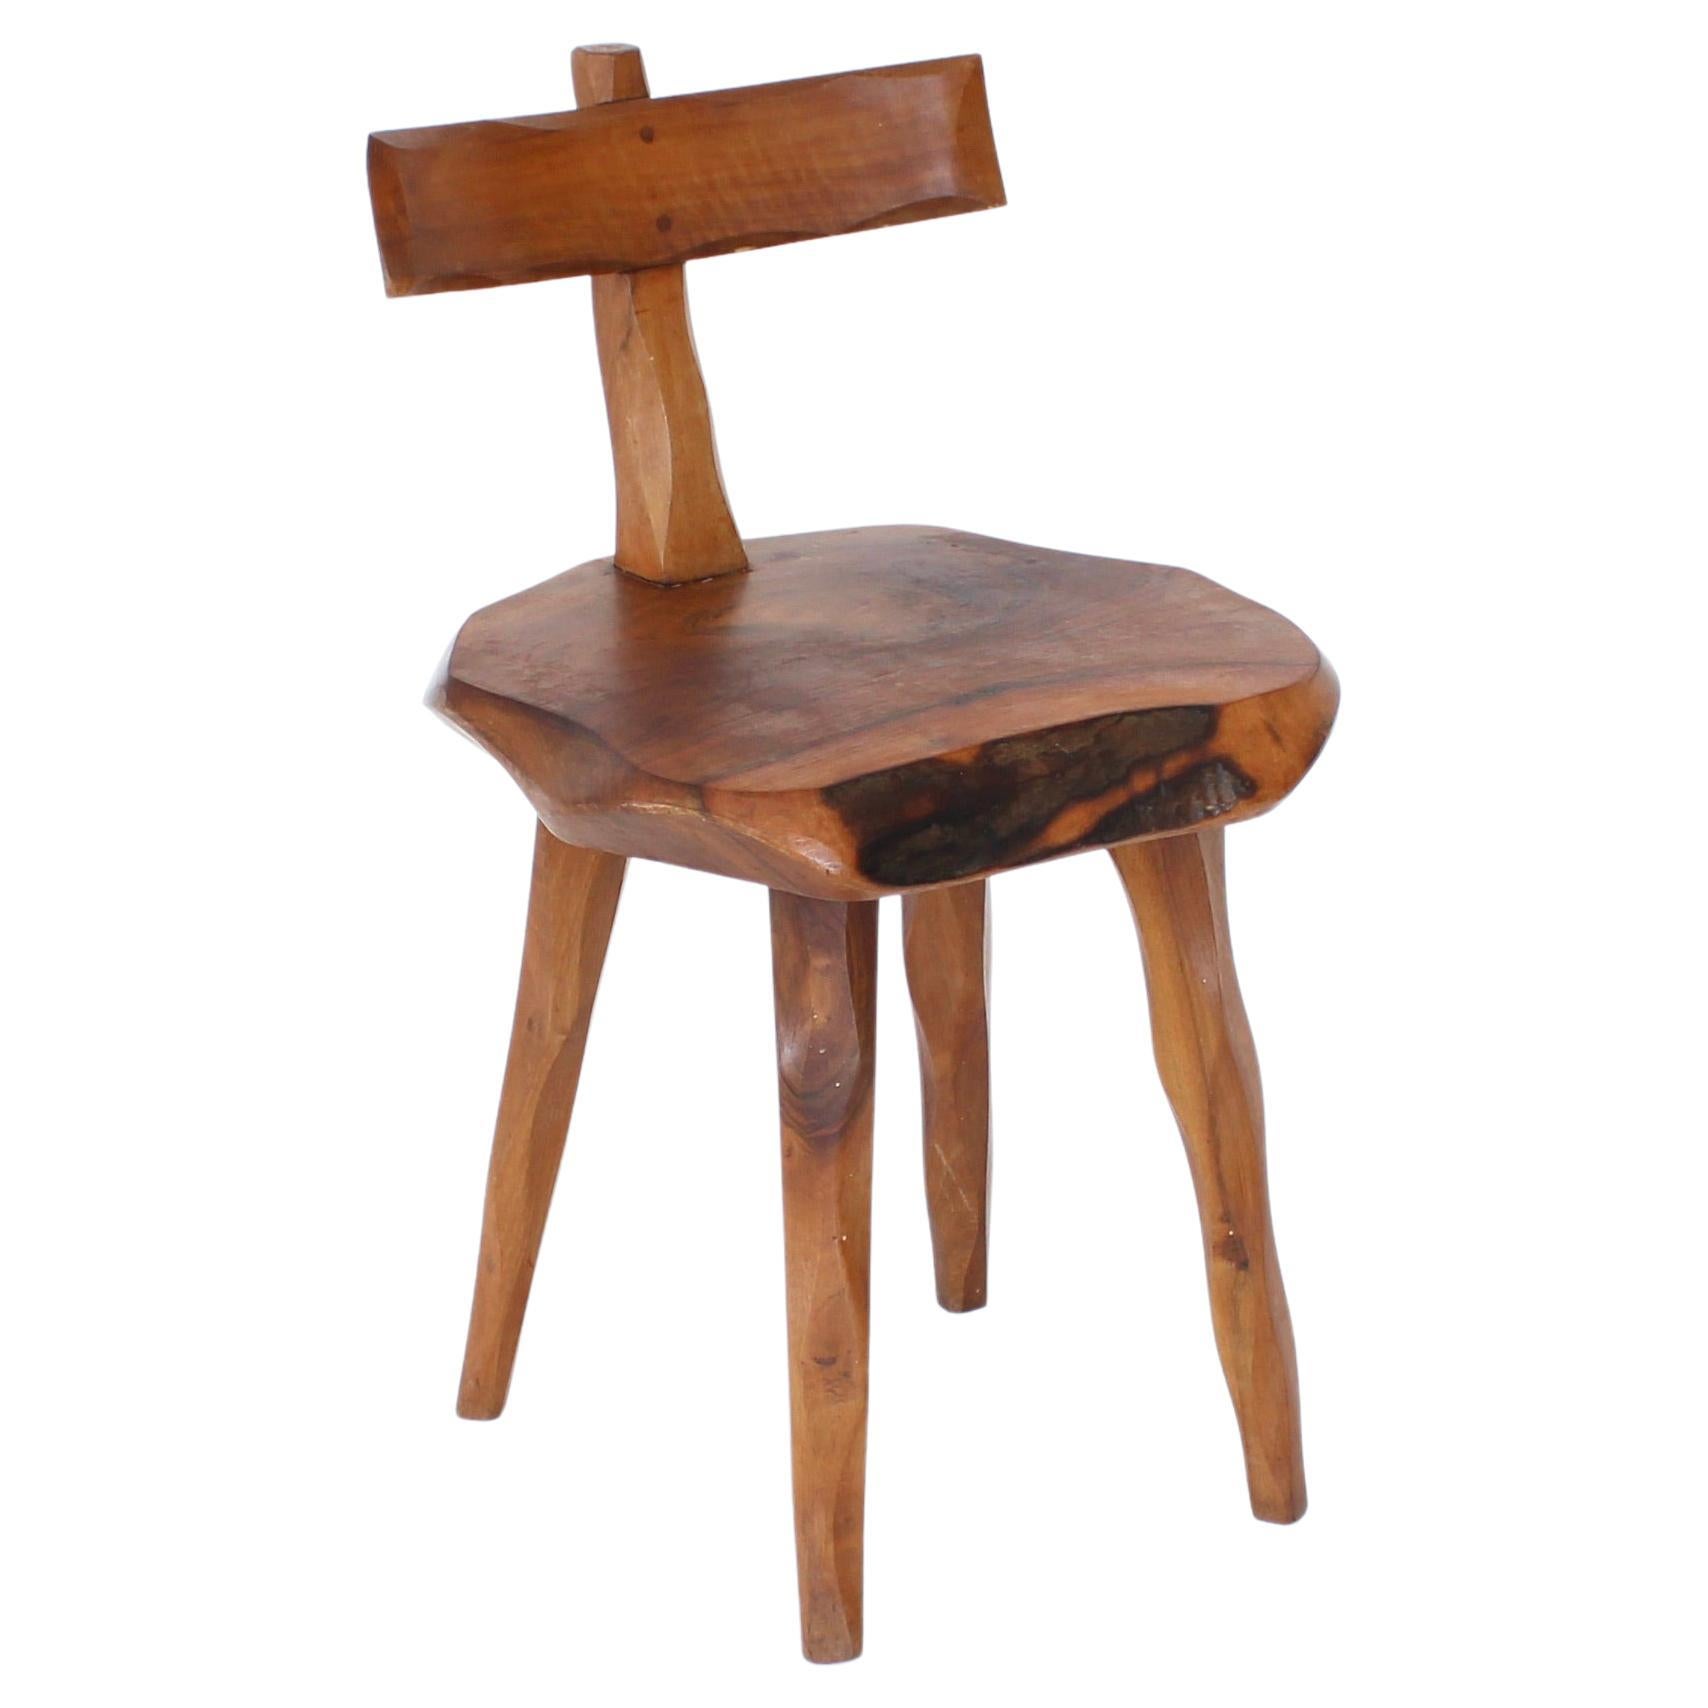 French Side Chair Hand Carved of Olive Wood Brutalist Organic